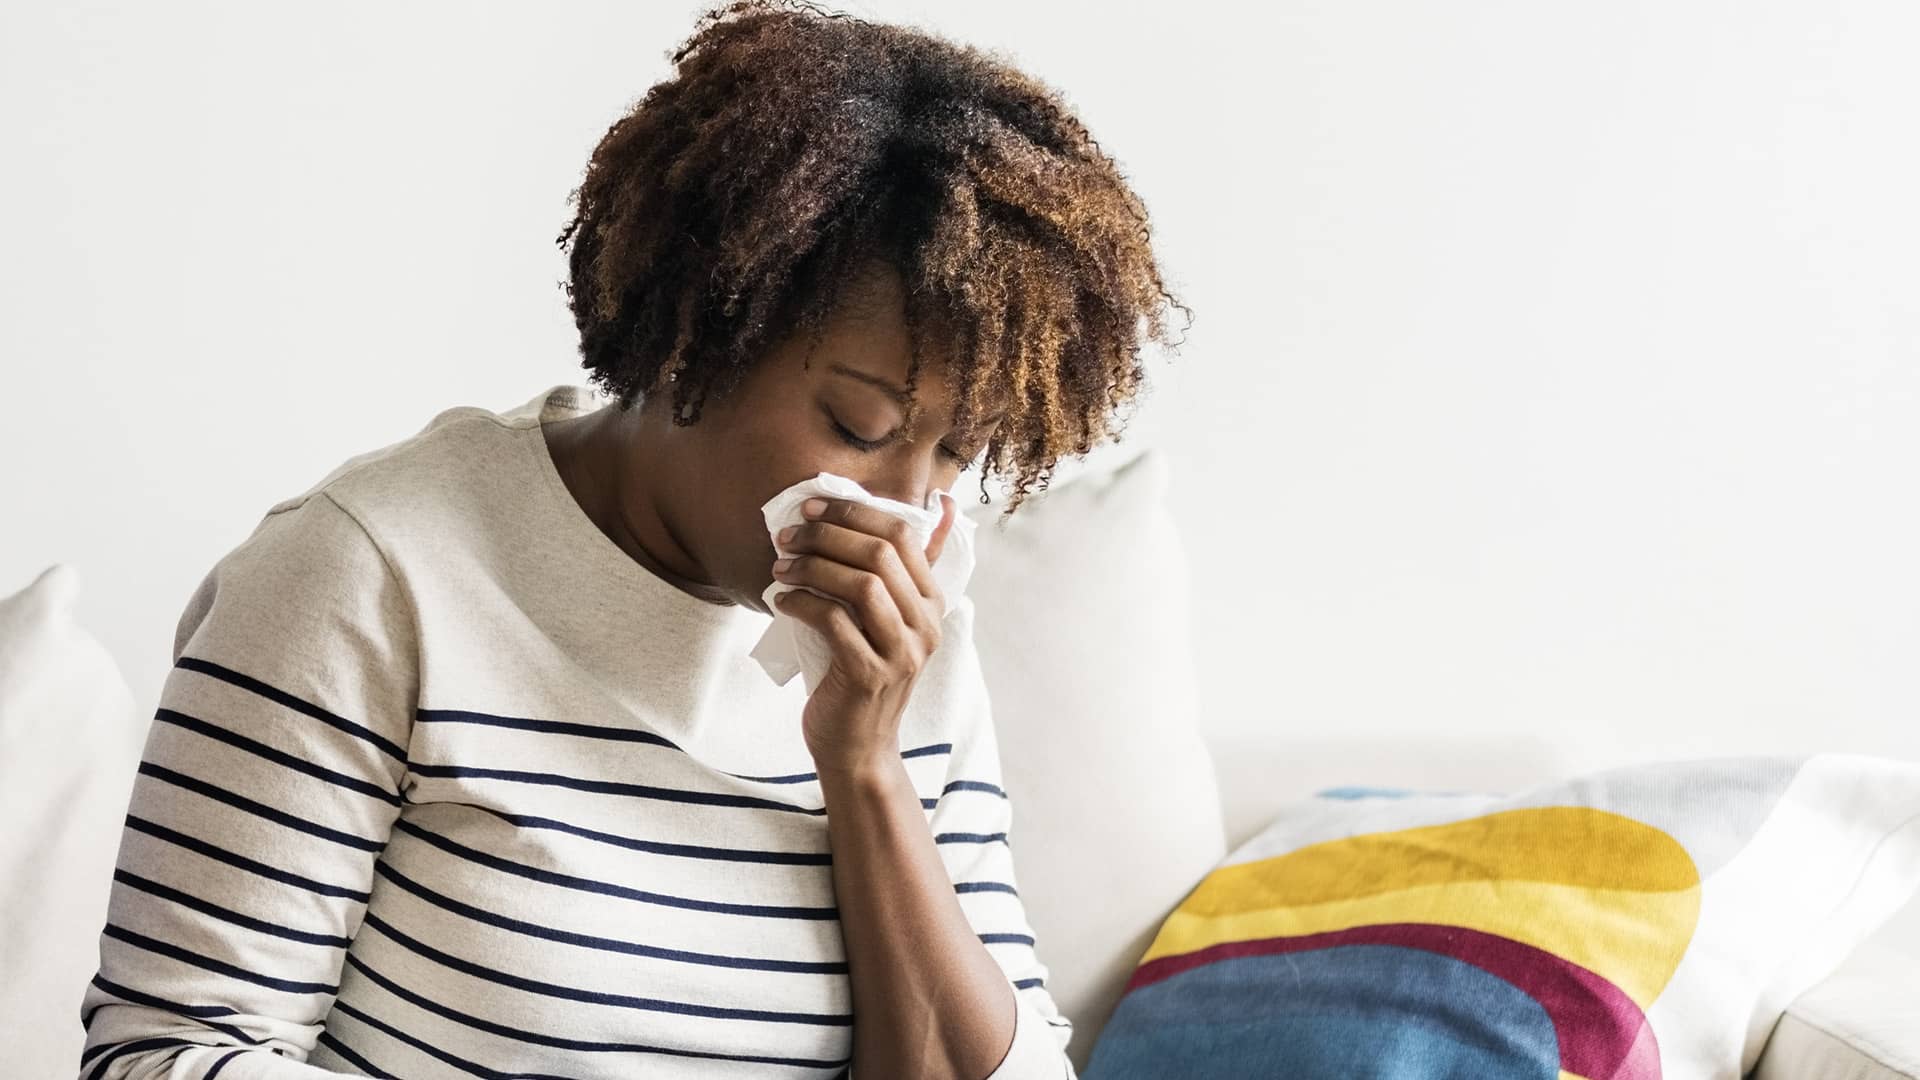 Colds, Flu, and Other Viral Illness